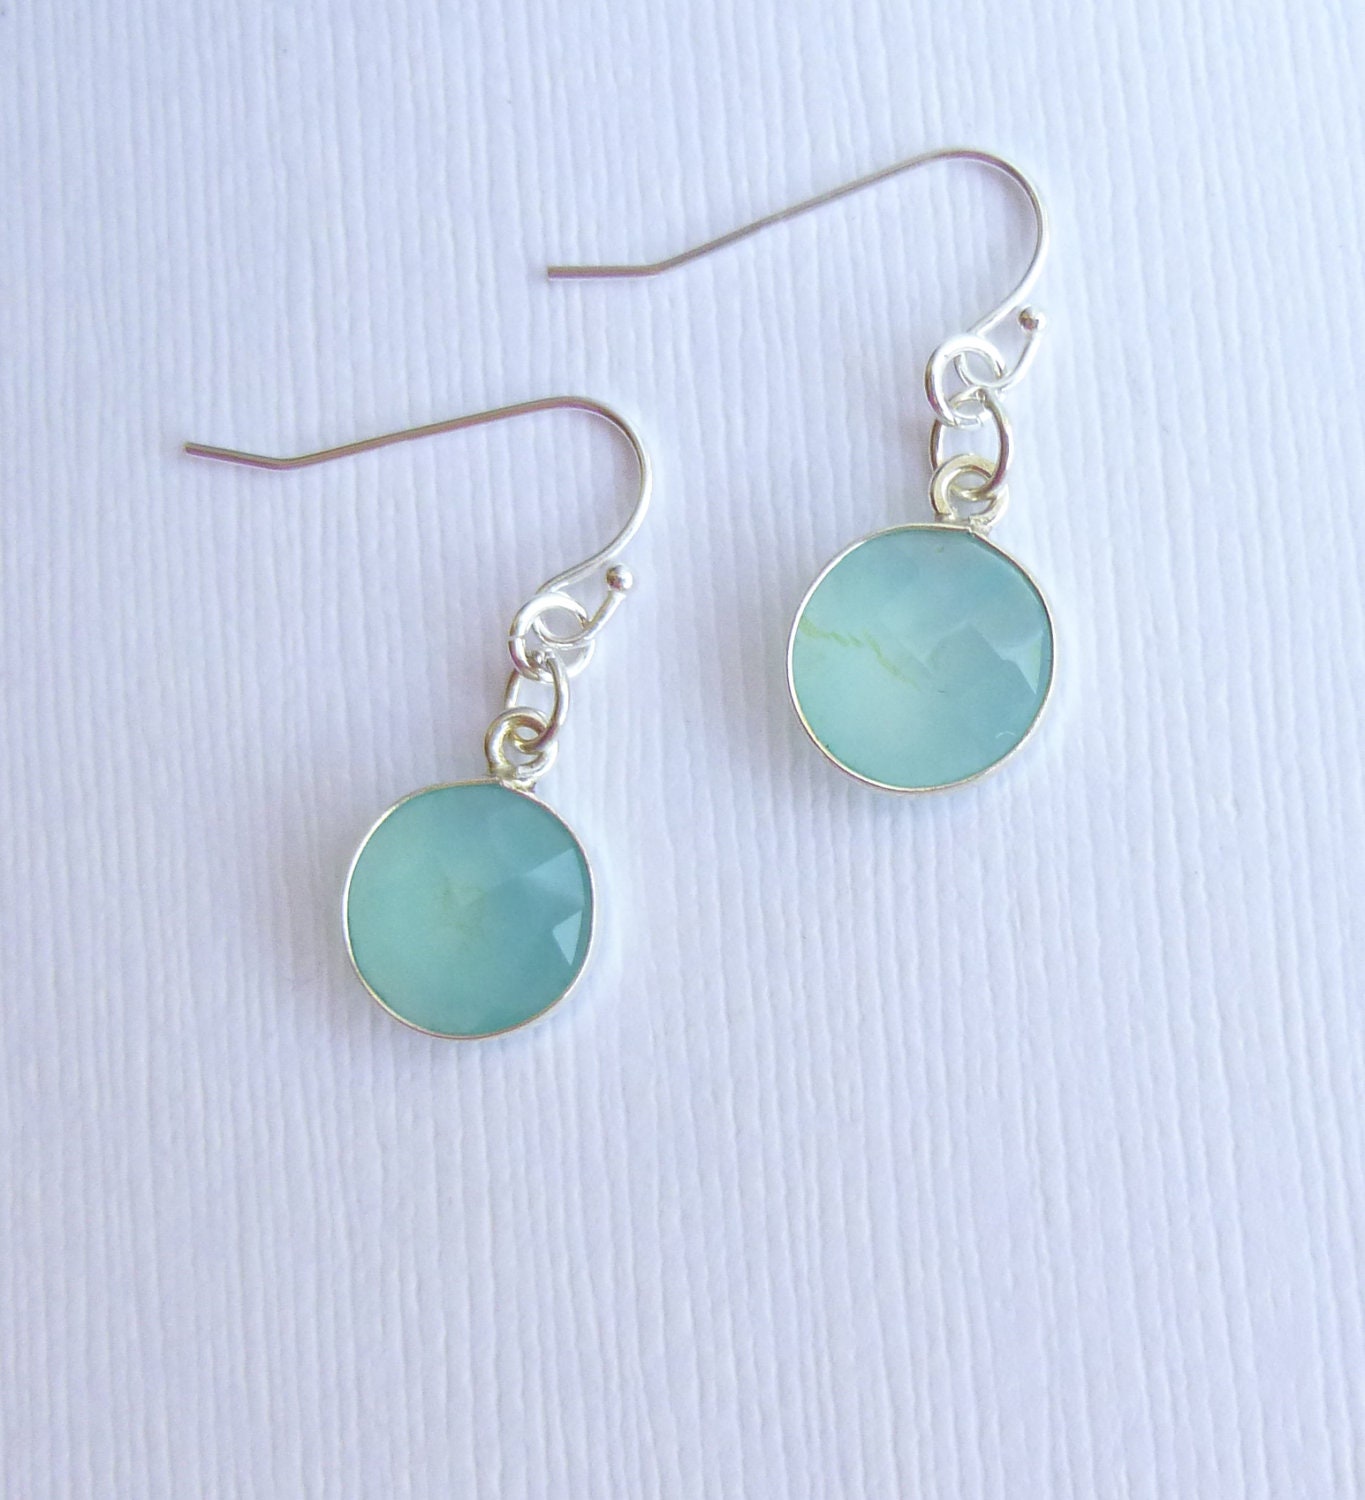 Sea Green Chalecedony Stone Earrings by tinycottagetreasures